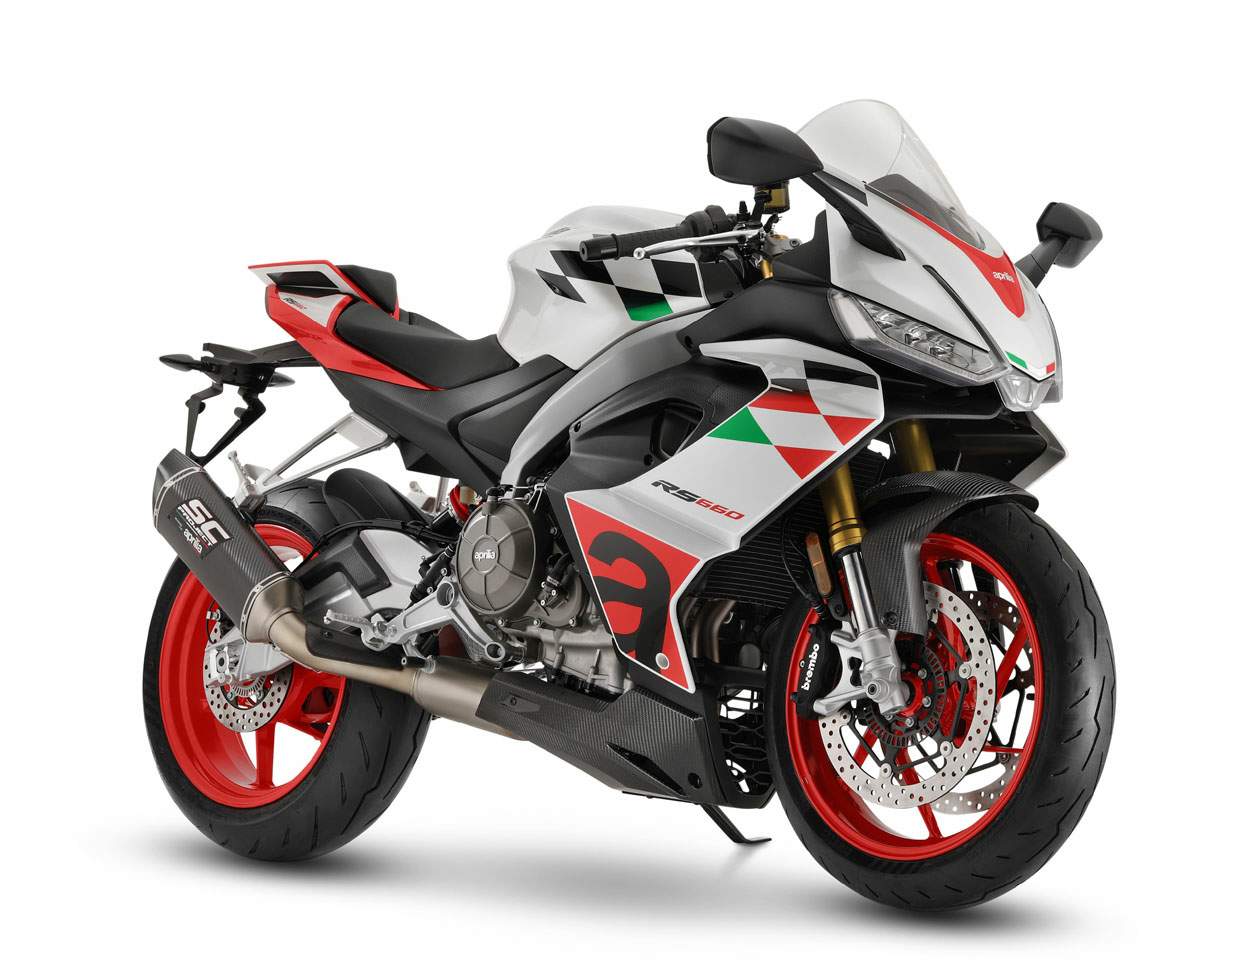 Aprilia RS 660 Extrema technical specifications